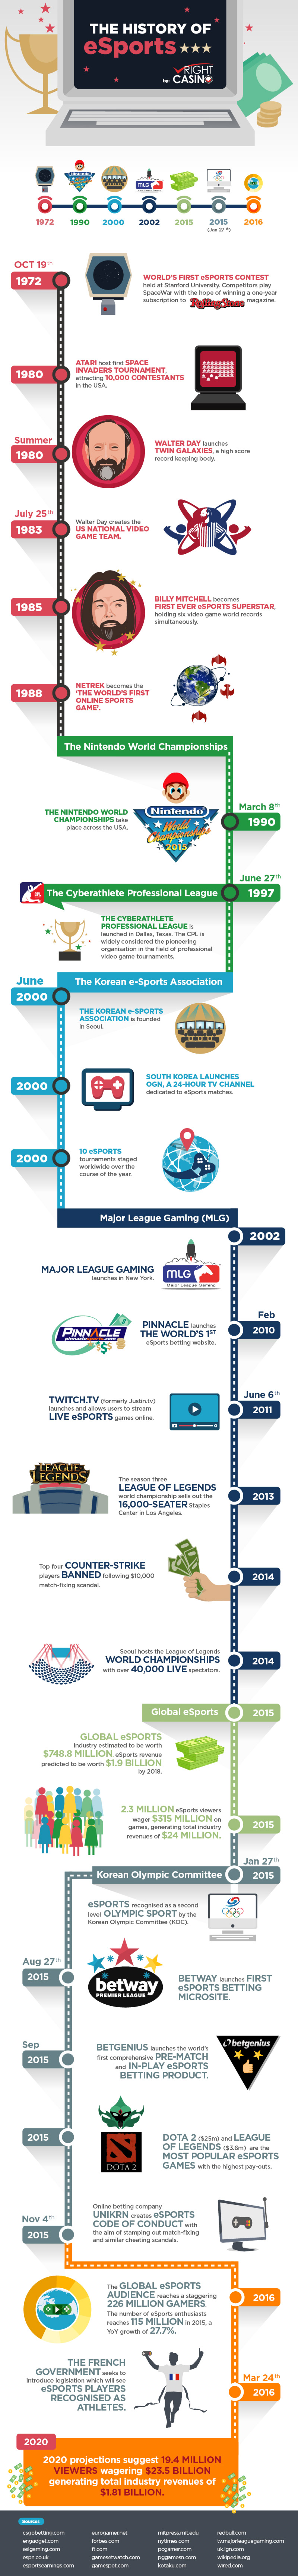 The-History-of-eSports-Betting_d06_d18_d29